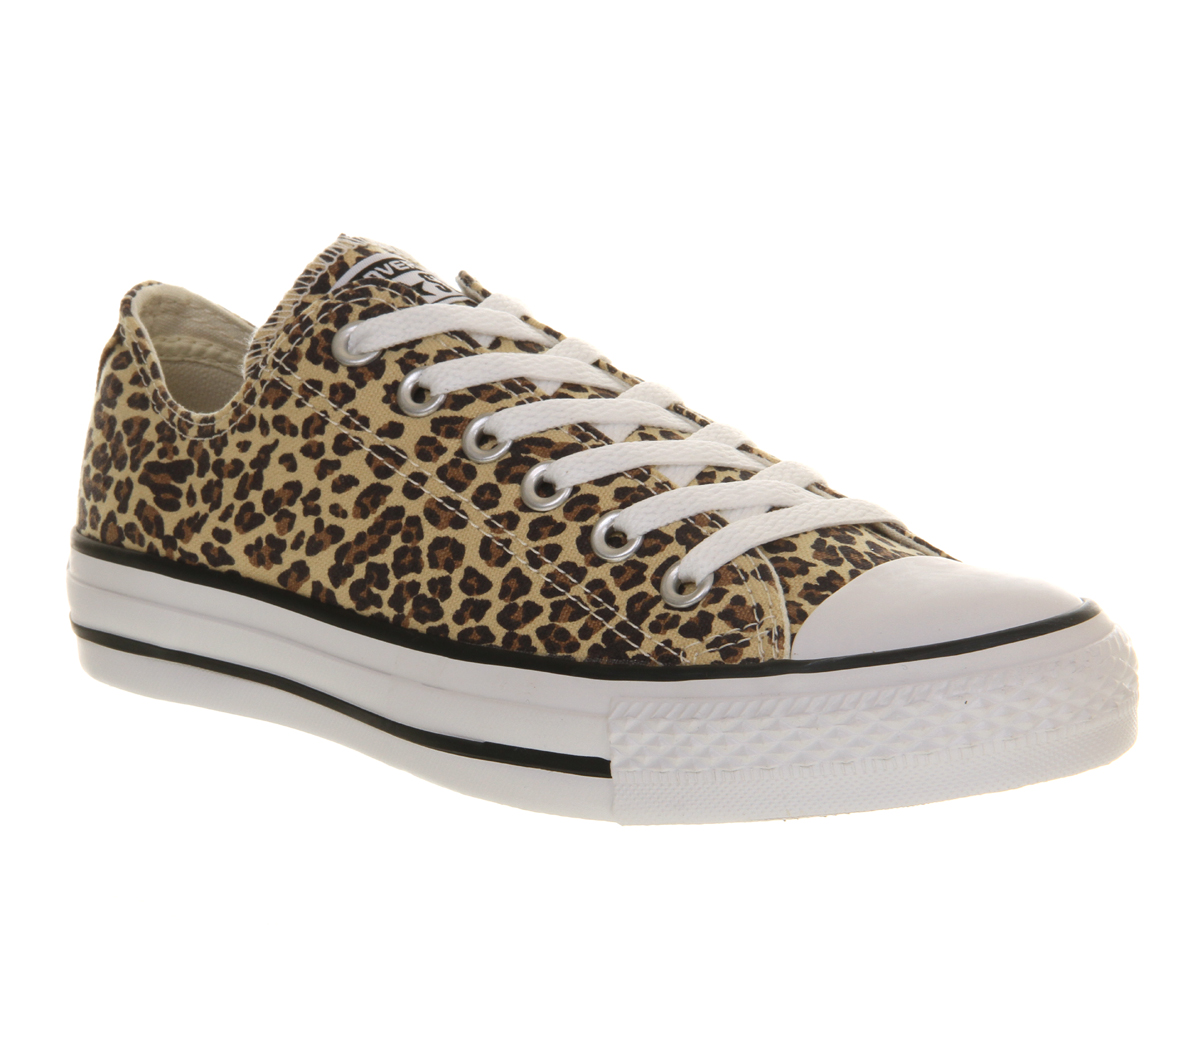 Converse All Star Low Leopard - Unisex 